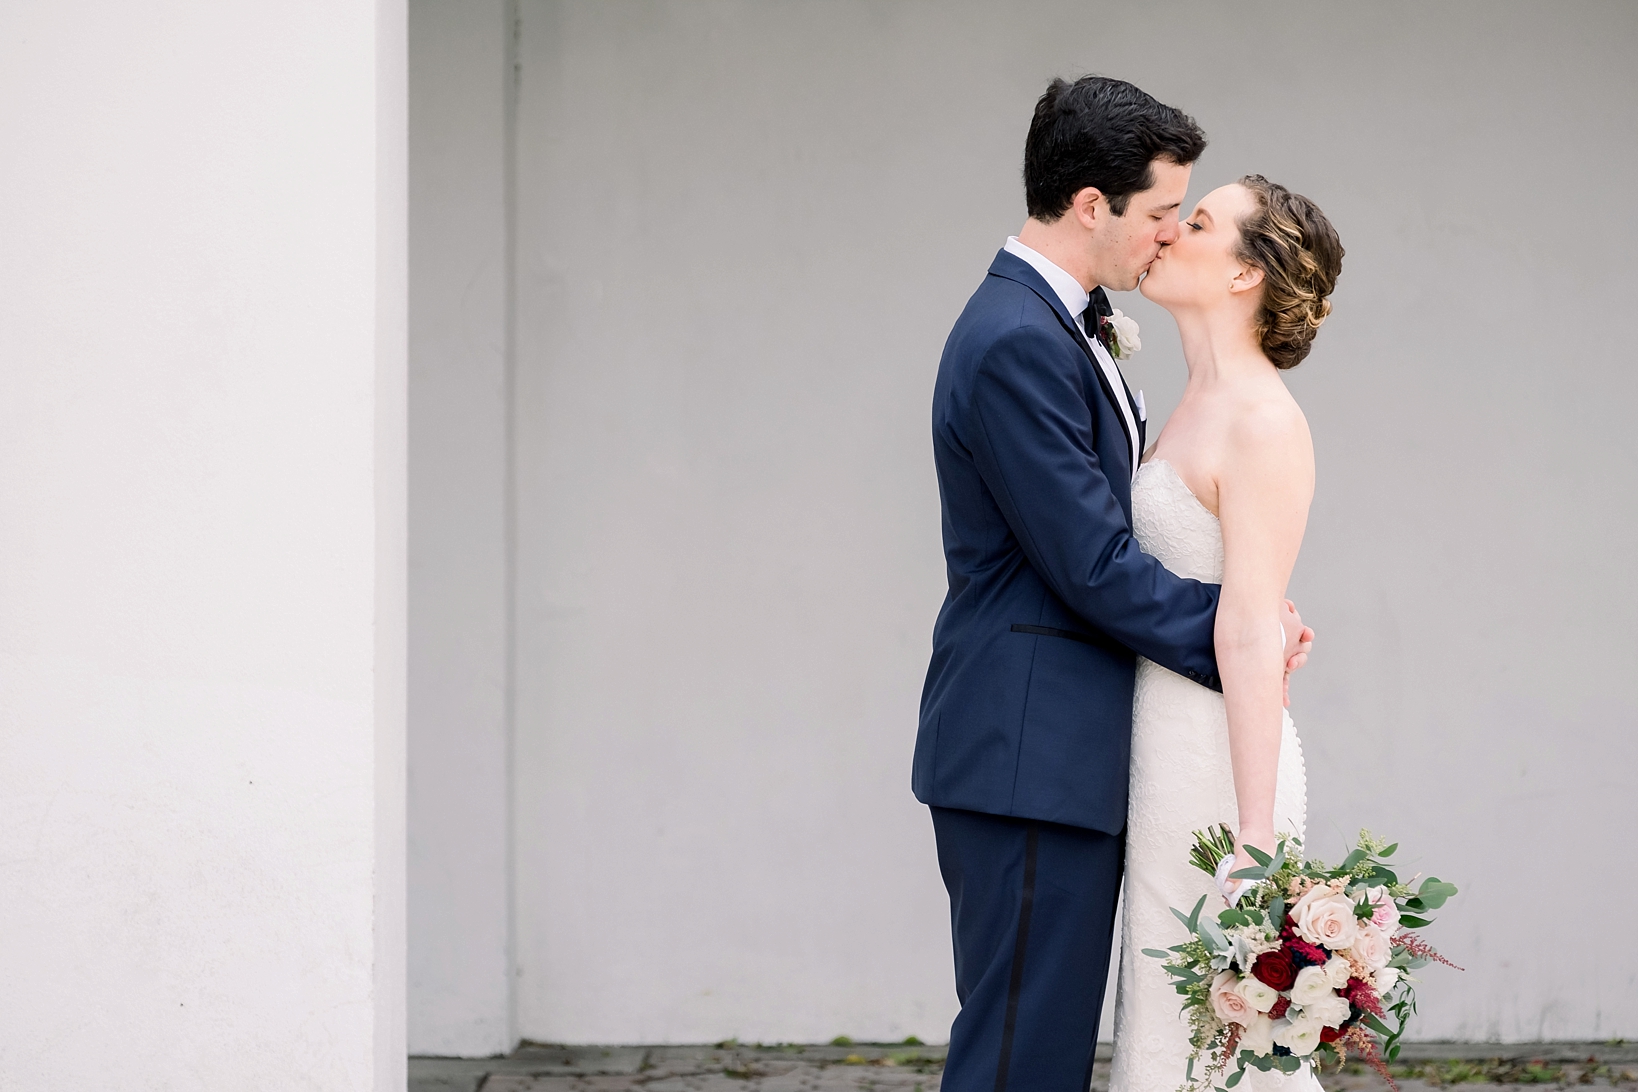 The Bride and Groom share an intimate moment by Sarah & Ben Photography